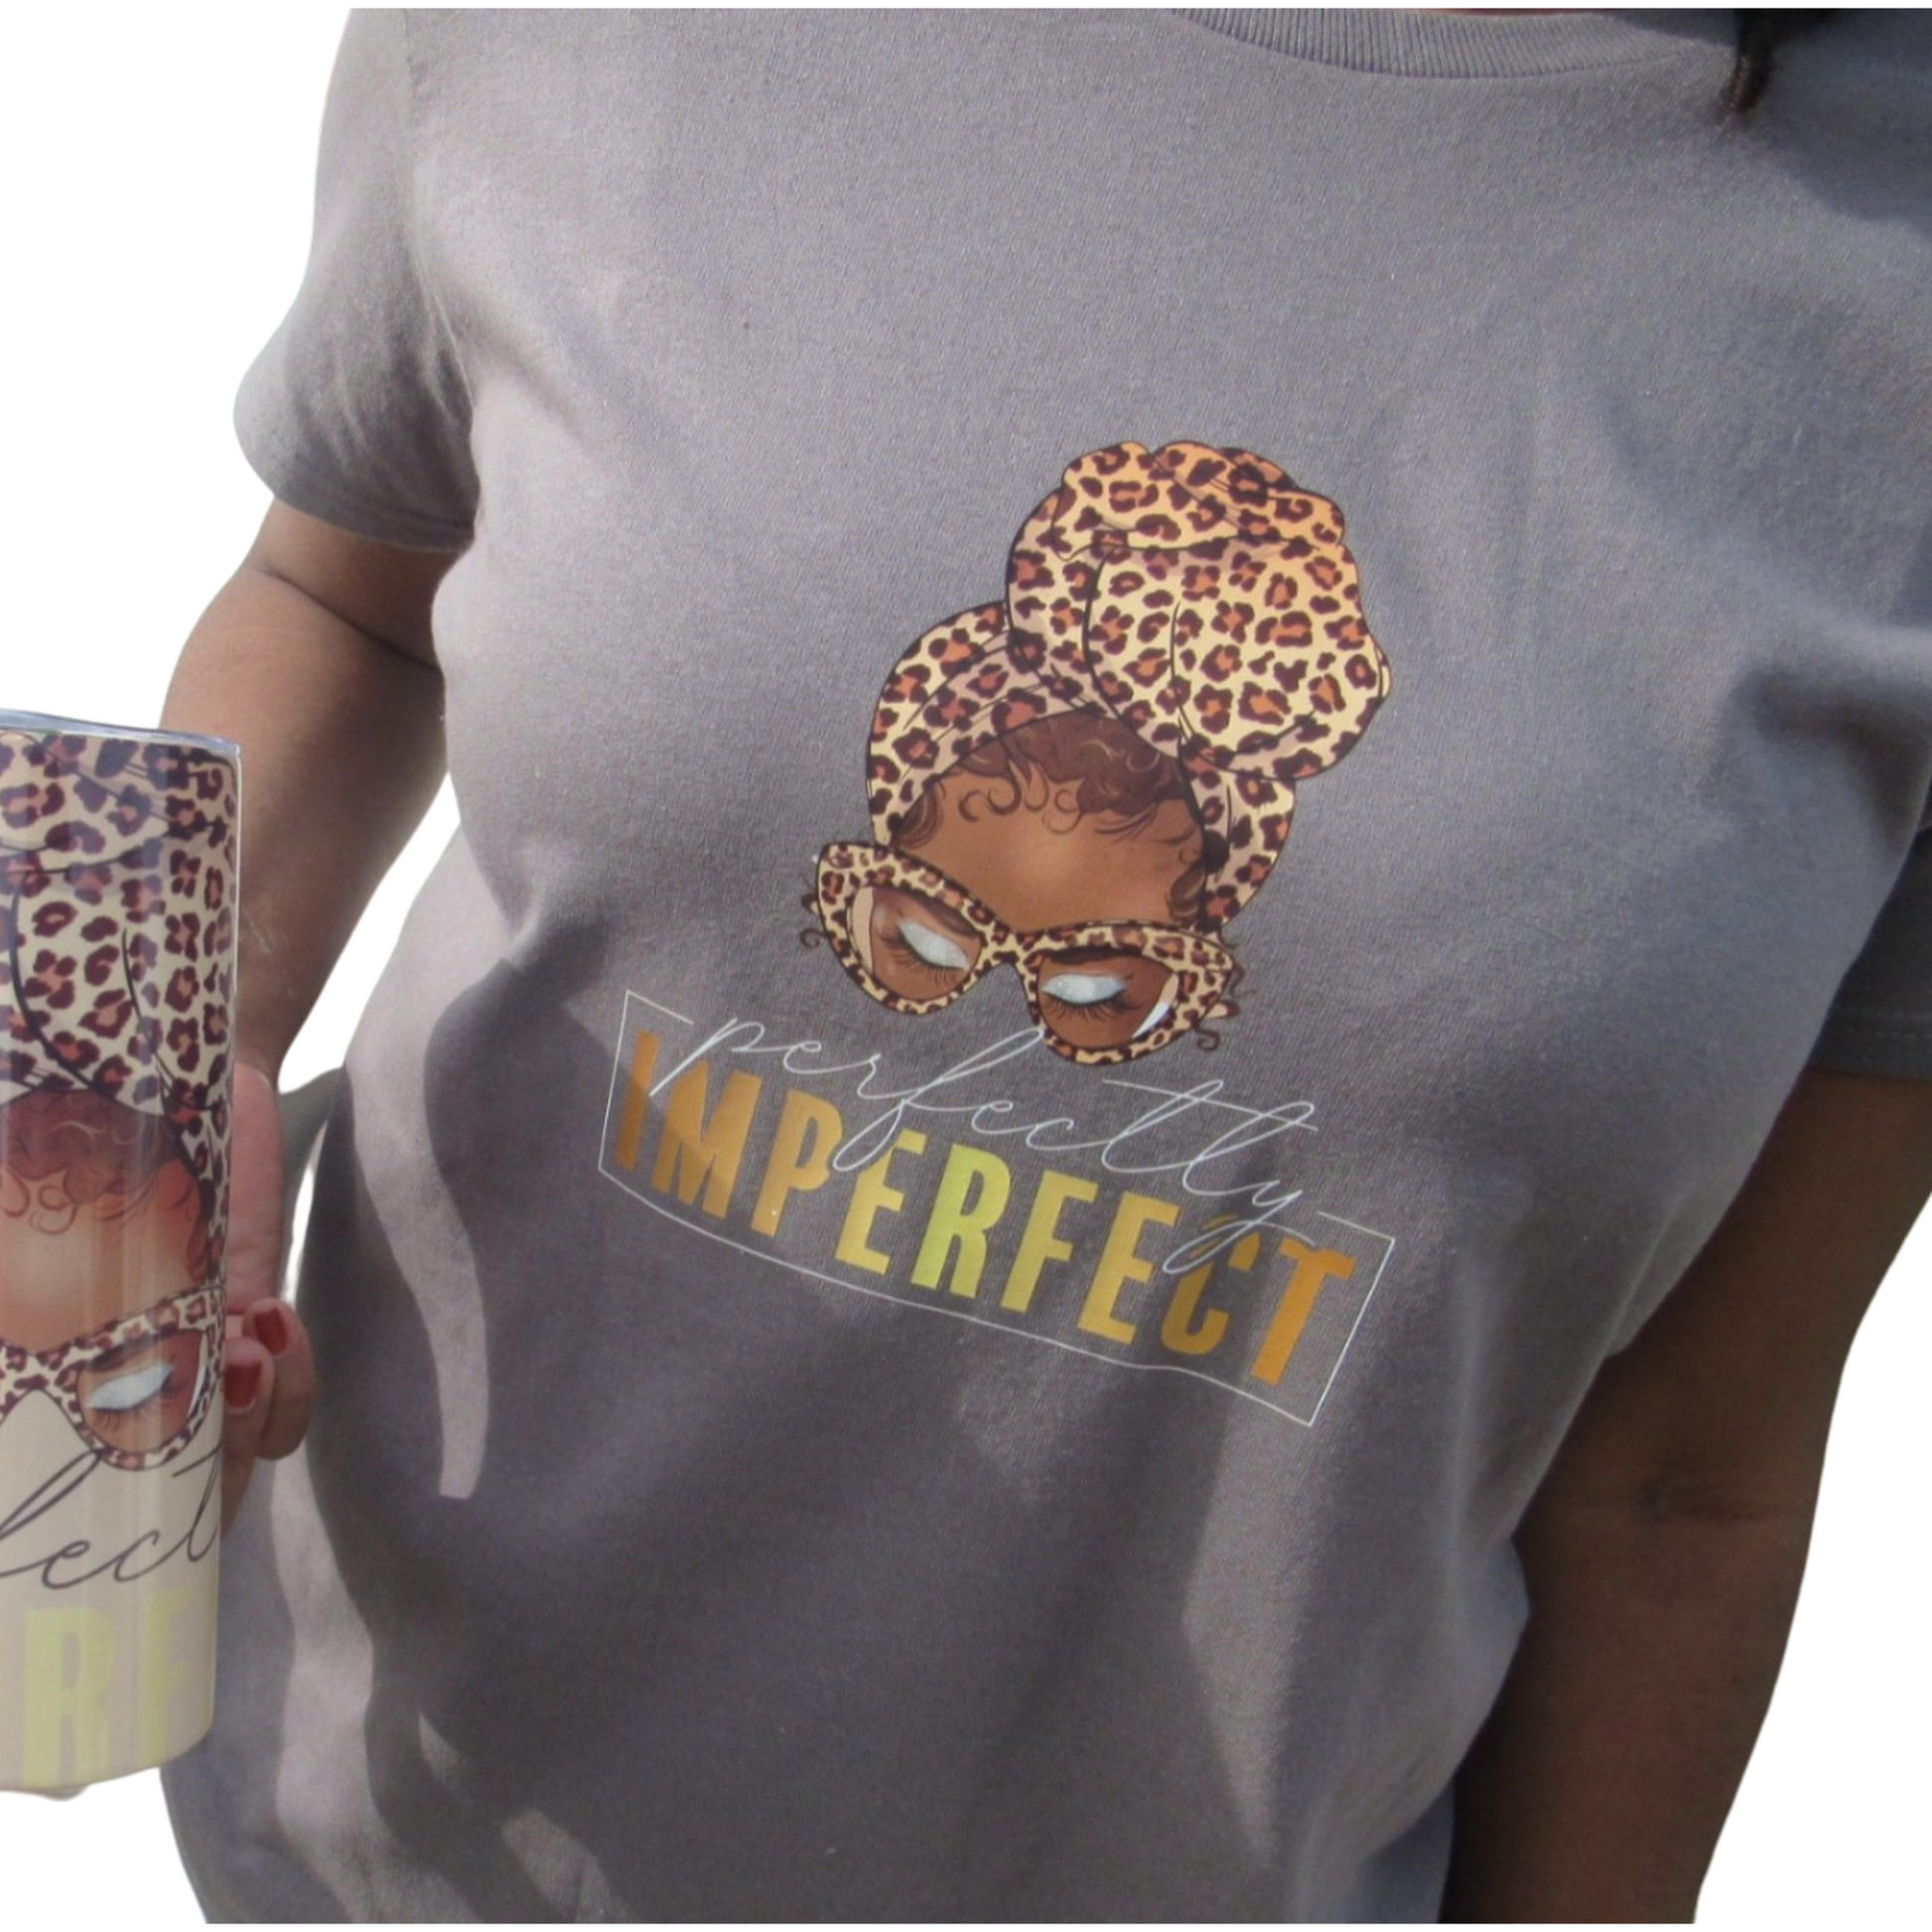 Perfectly Imperfect (Grey) Women's T-shirt